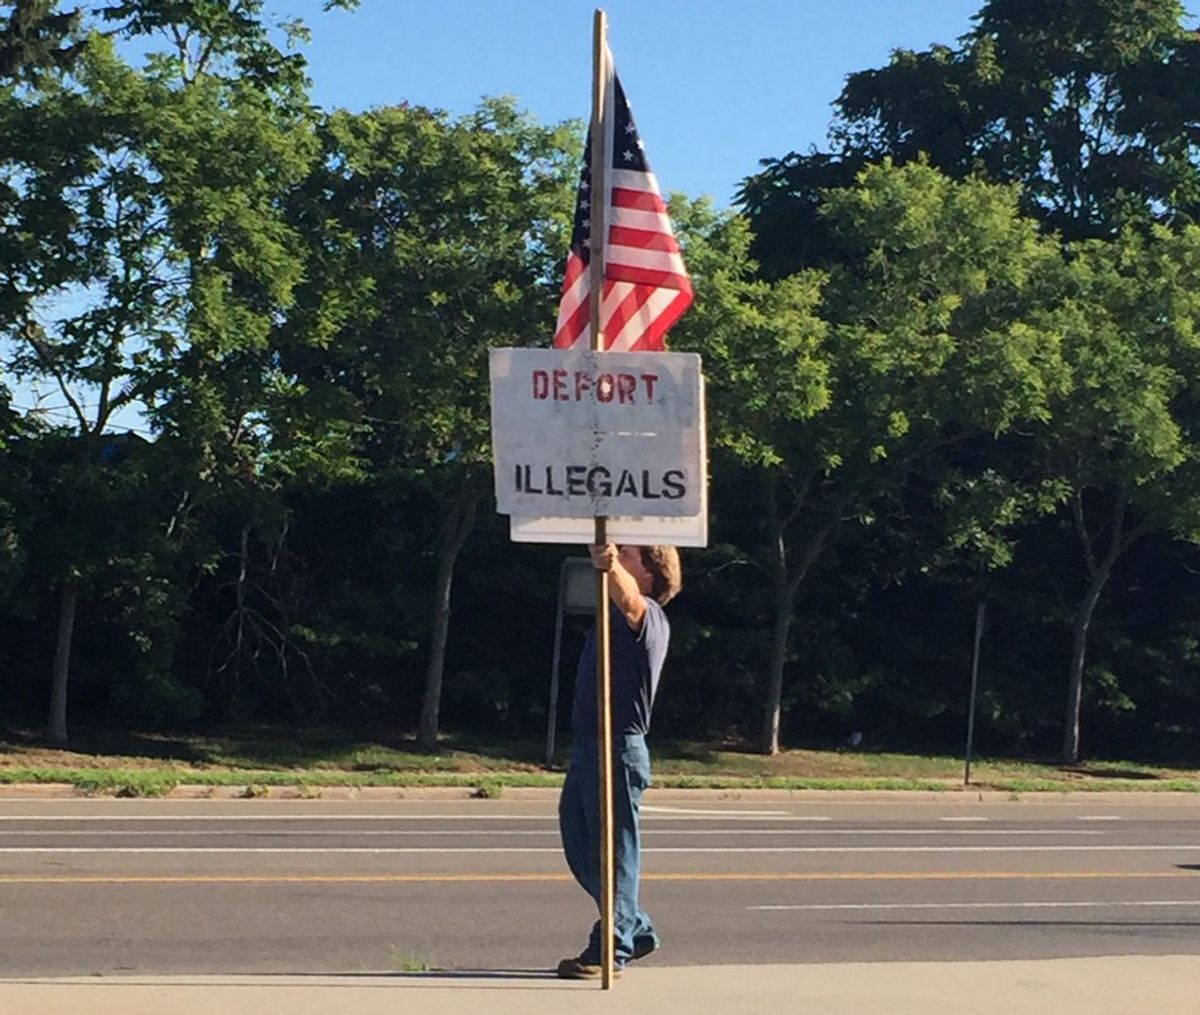 The Hamptons Protester Who Really Hates "Illegal Immigrants"